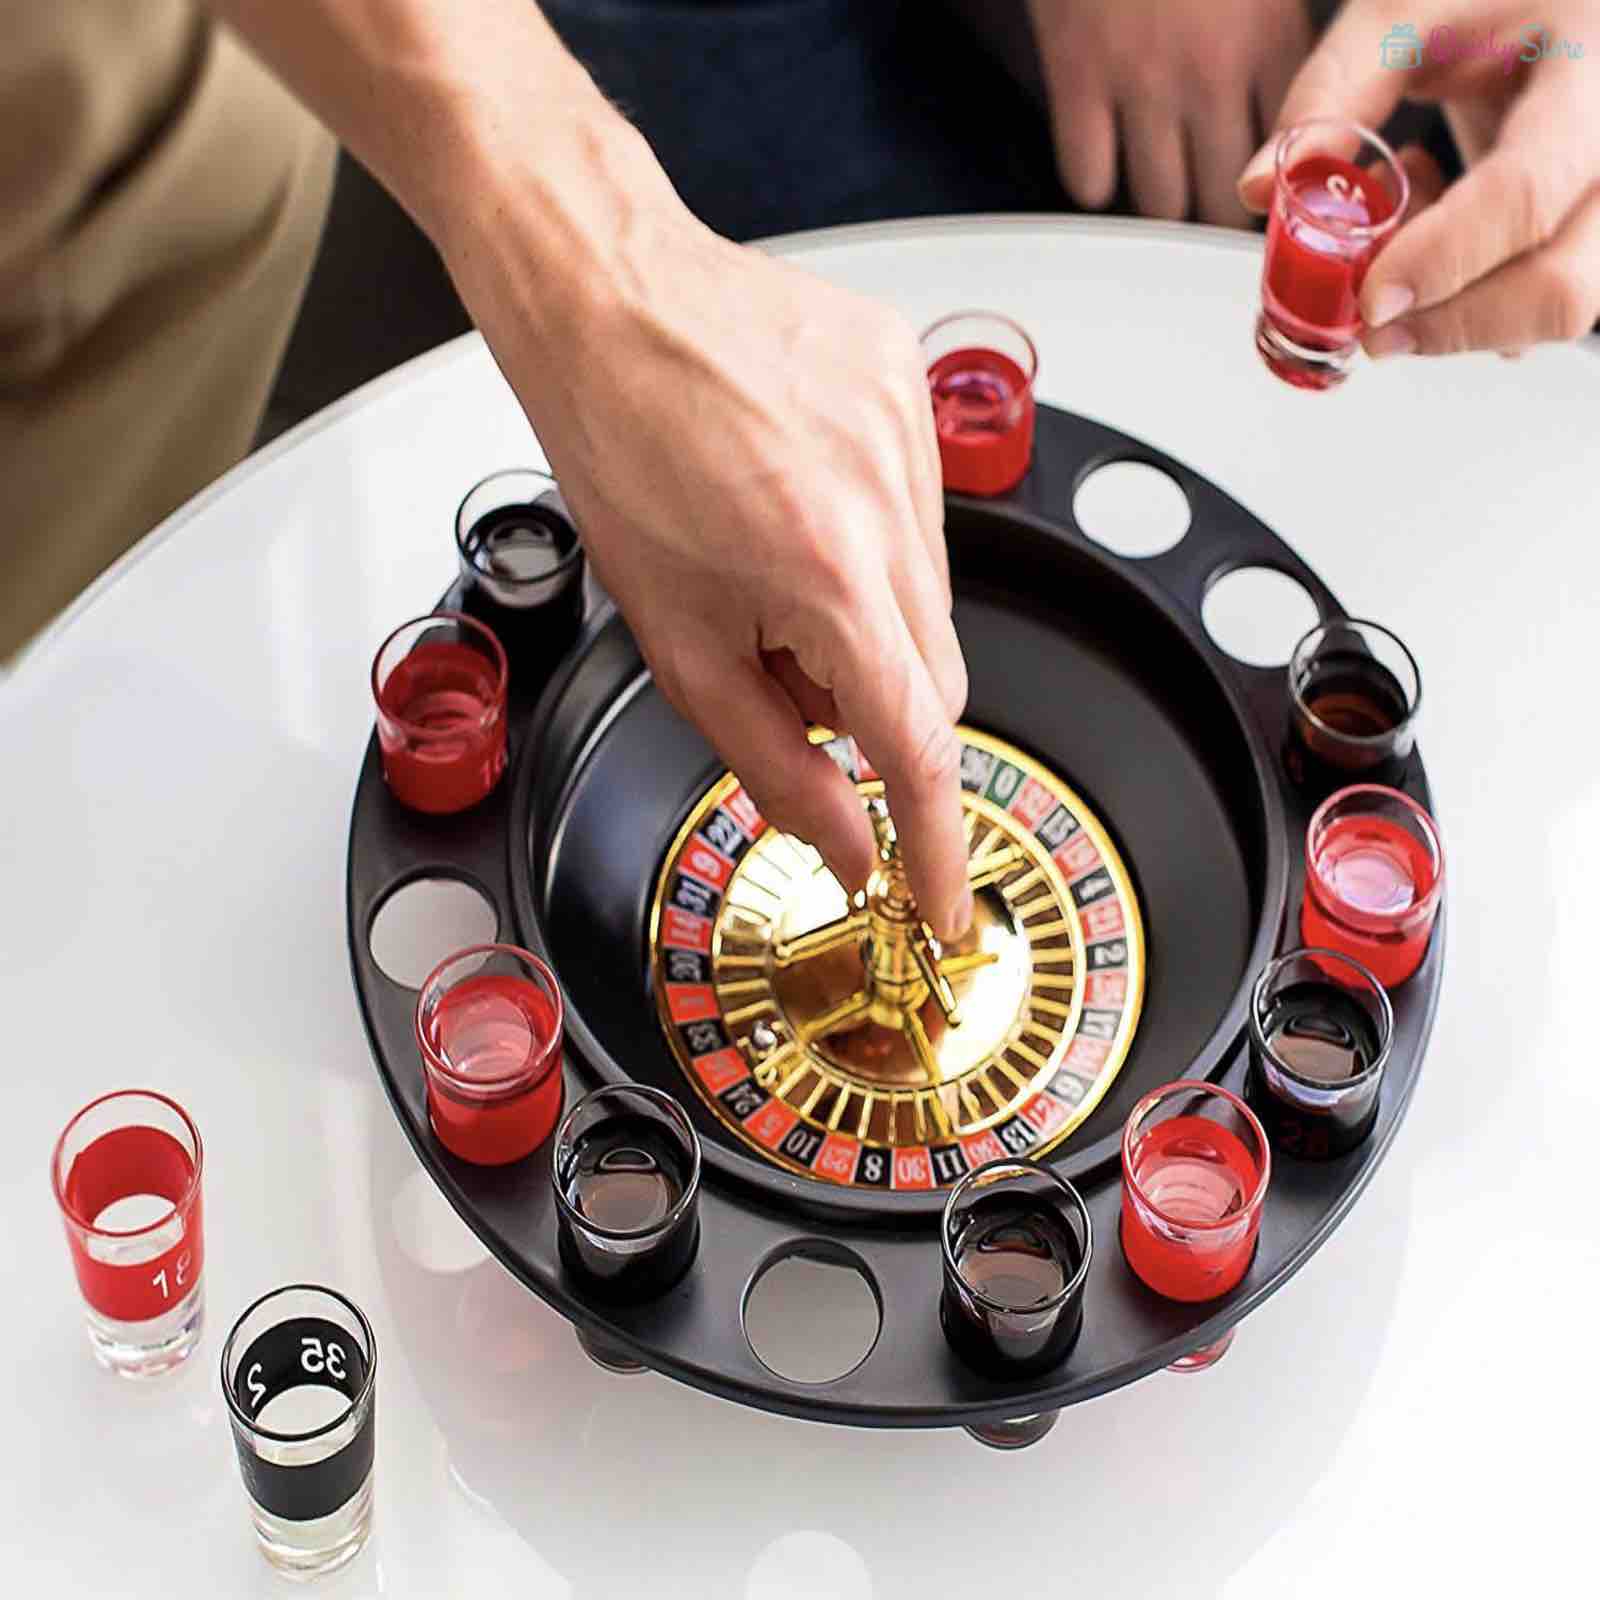 Drinking Roulette Set ( 16 Shot Glasses ) - QuirkyStore.in